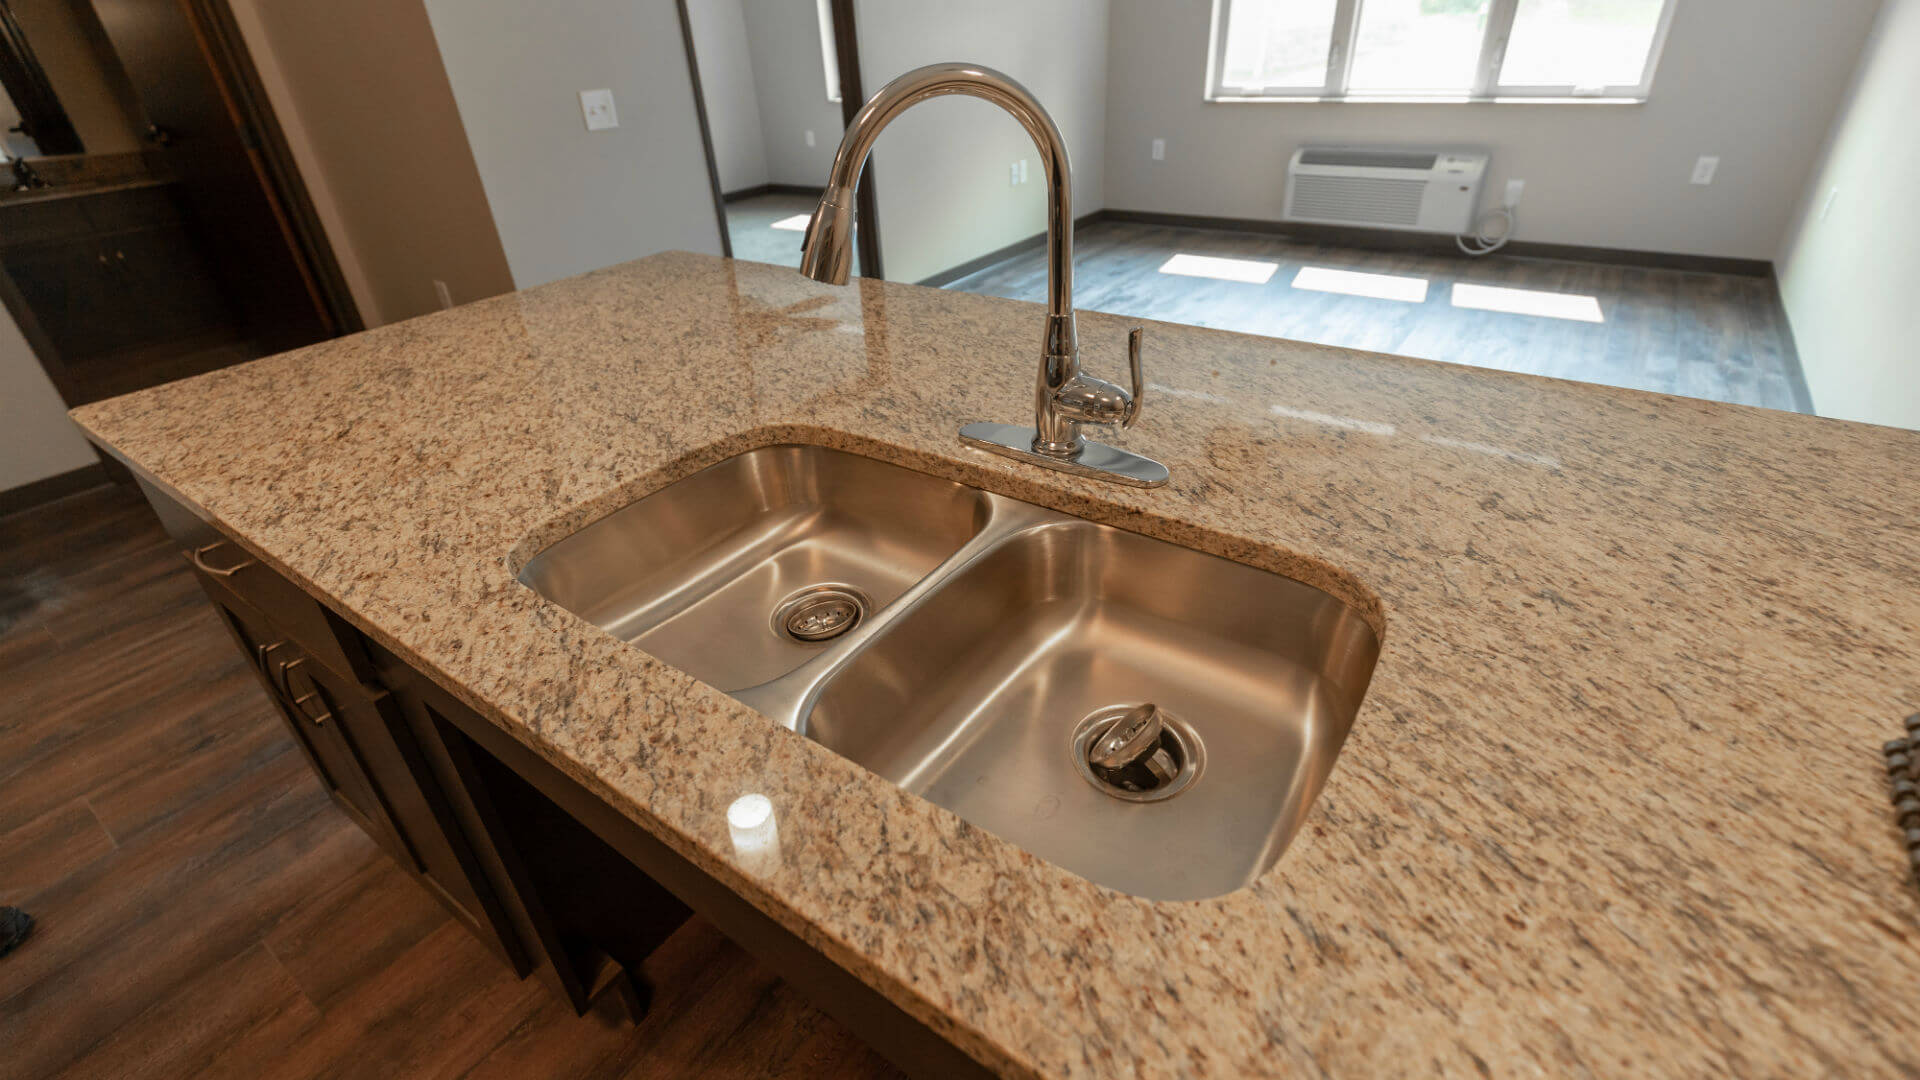 Hometown Plumbing and Heating Quad Cities Iowa Projects Park Vista Retirement Living sink